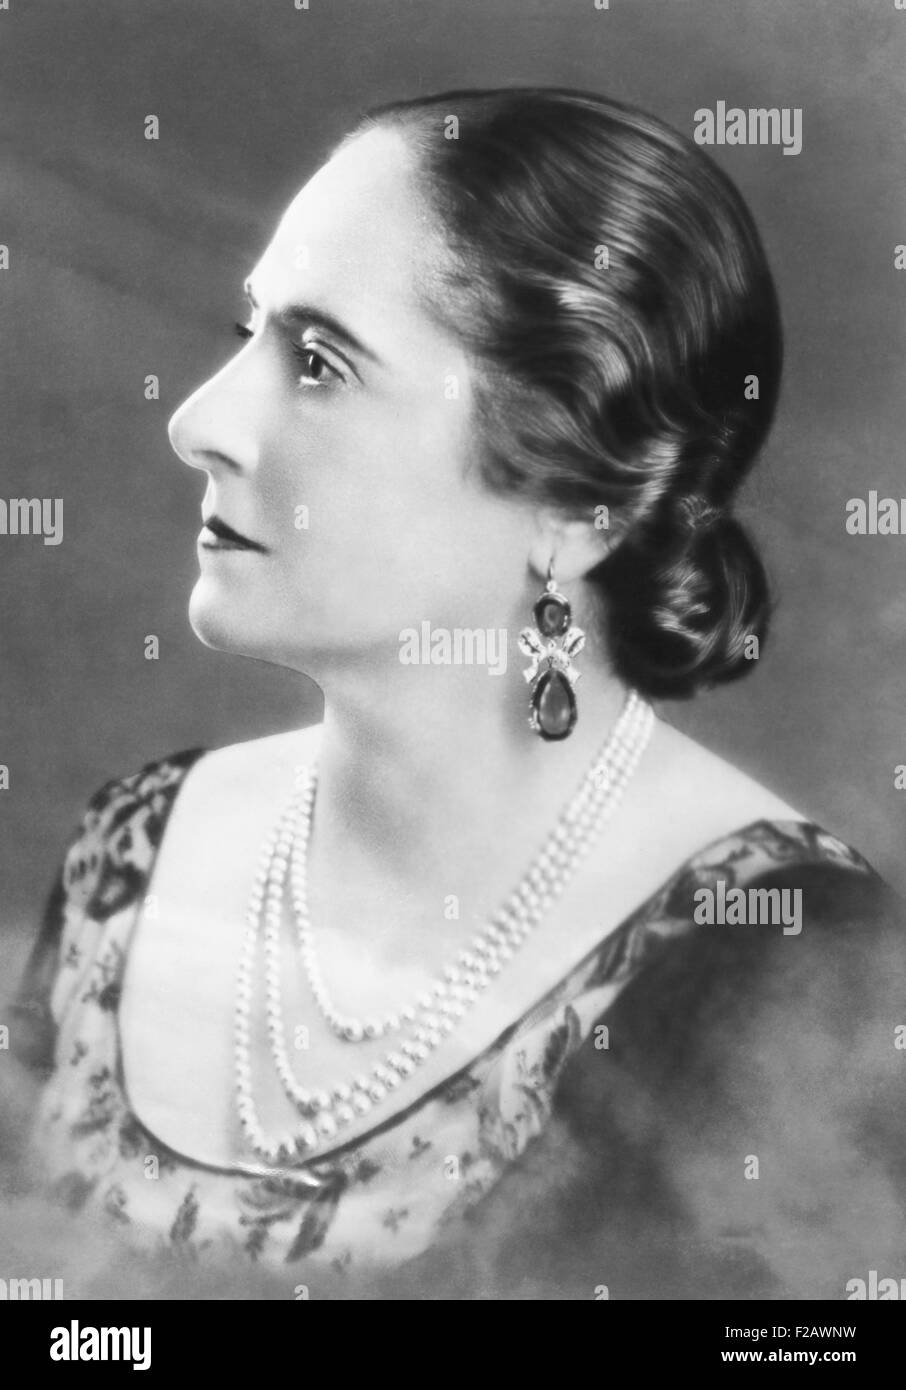 Helena Rubenstein internationally famous cosmetics mogul ca. 1930s. Profile portrait with precious stone earrings and pearls was taken as she neared her 60th birthday and was a multi-millionaire. (CSU 2015 11 1272) Stock Photo